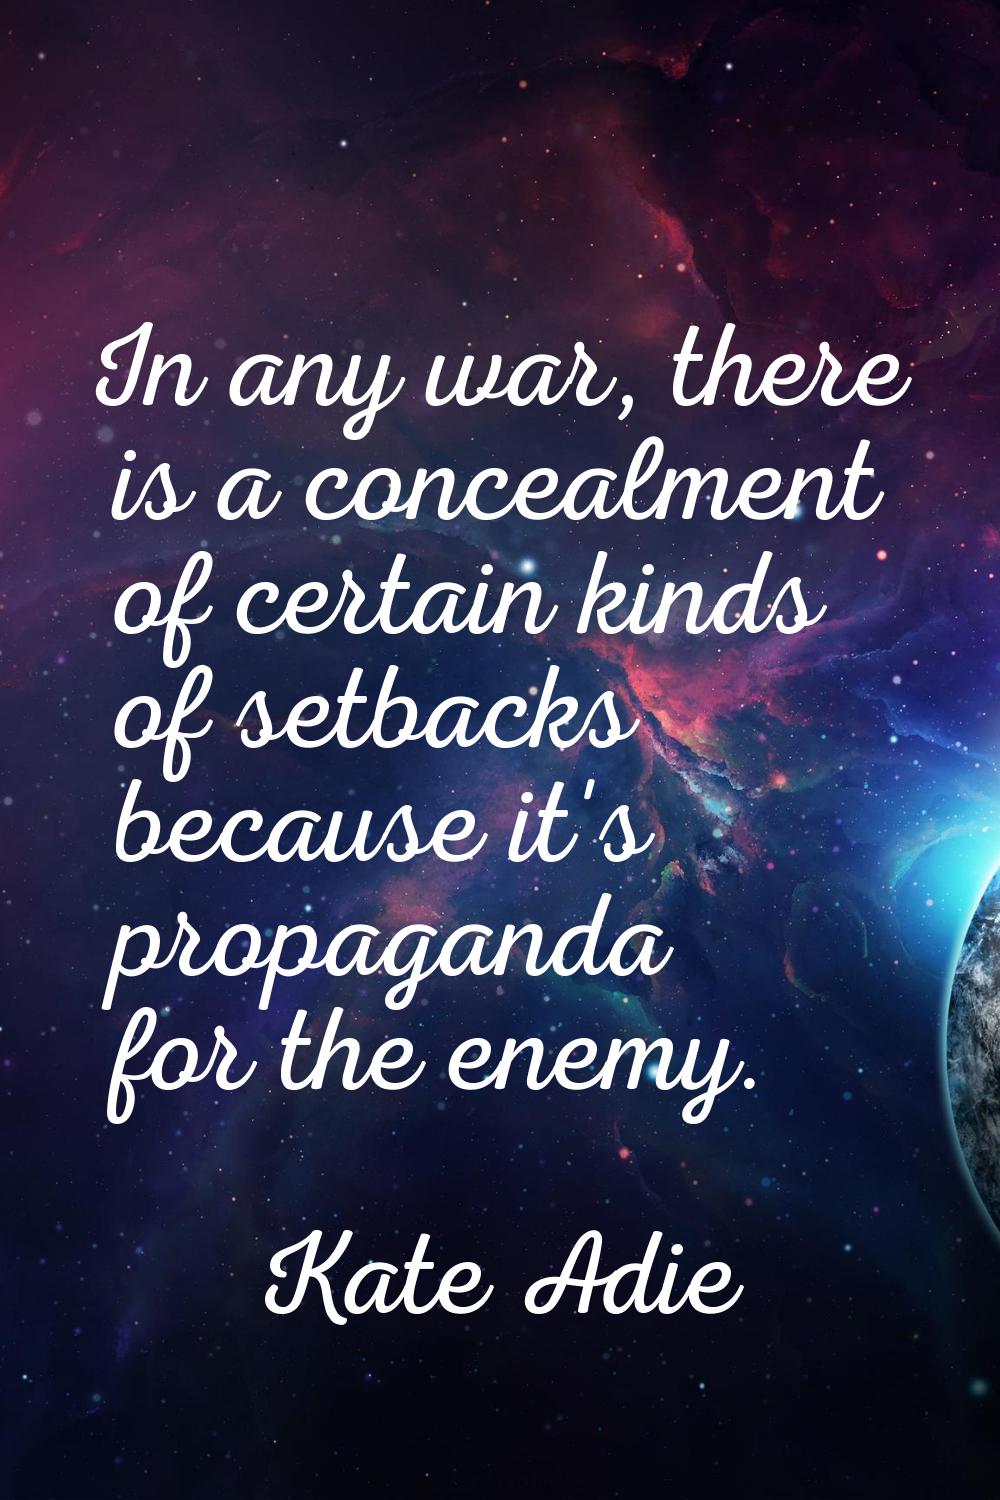 In any war, there is a concealment of certain kinds of setbacks because it's propaganda for the ene